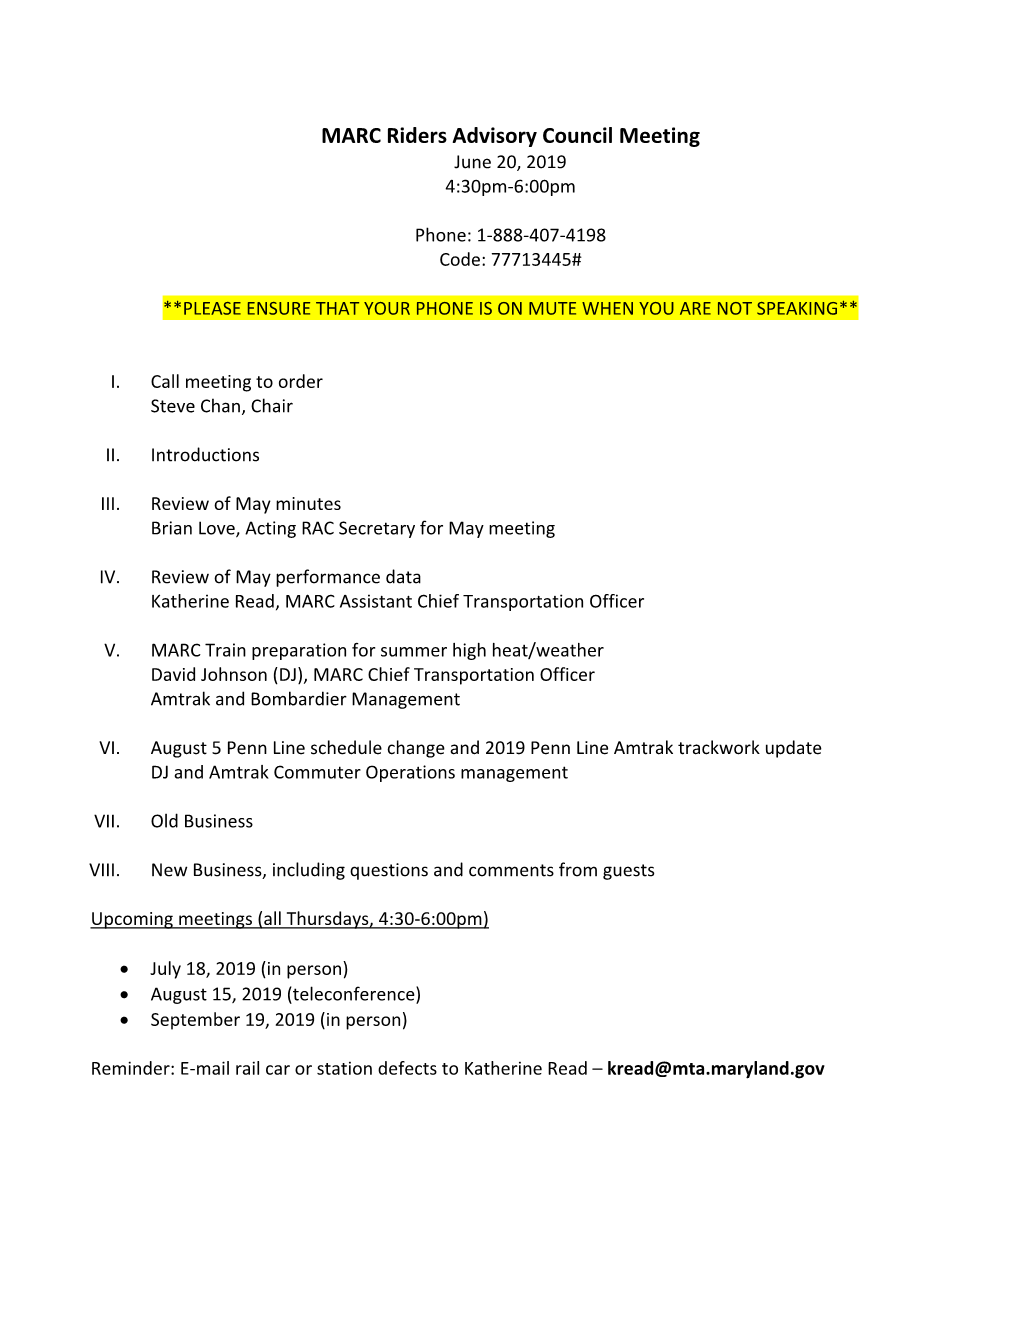 MARC Riders Advisory Council Meeting June 20, 2019 4:30Pm‐6:00Pm